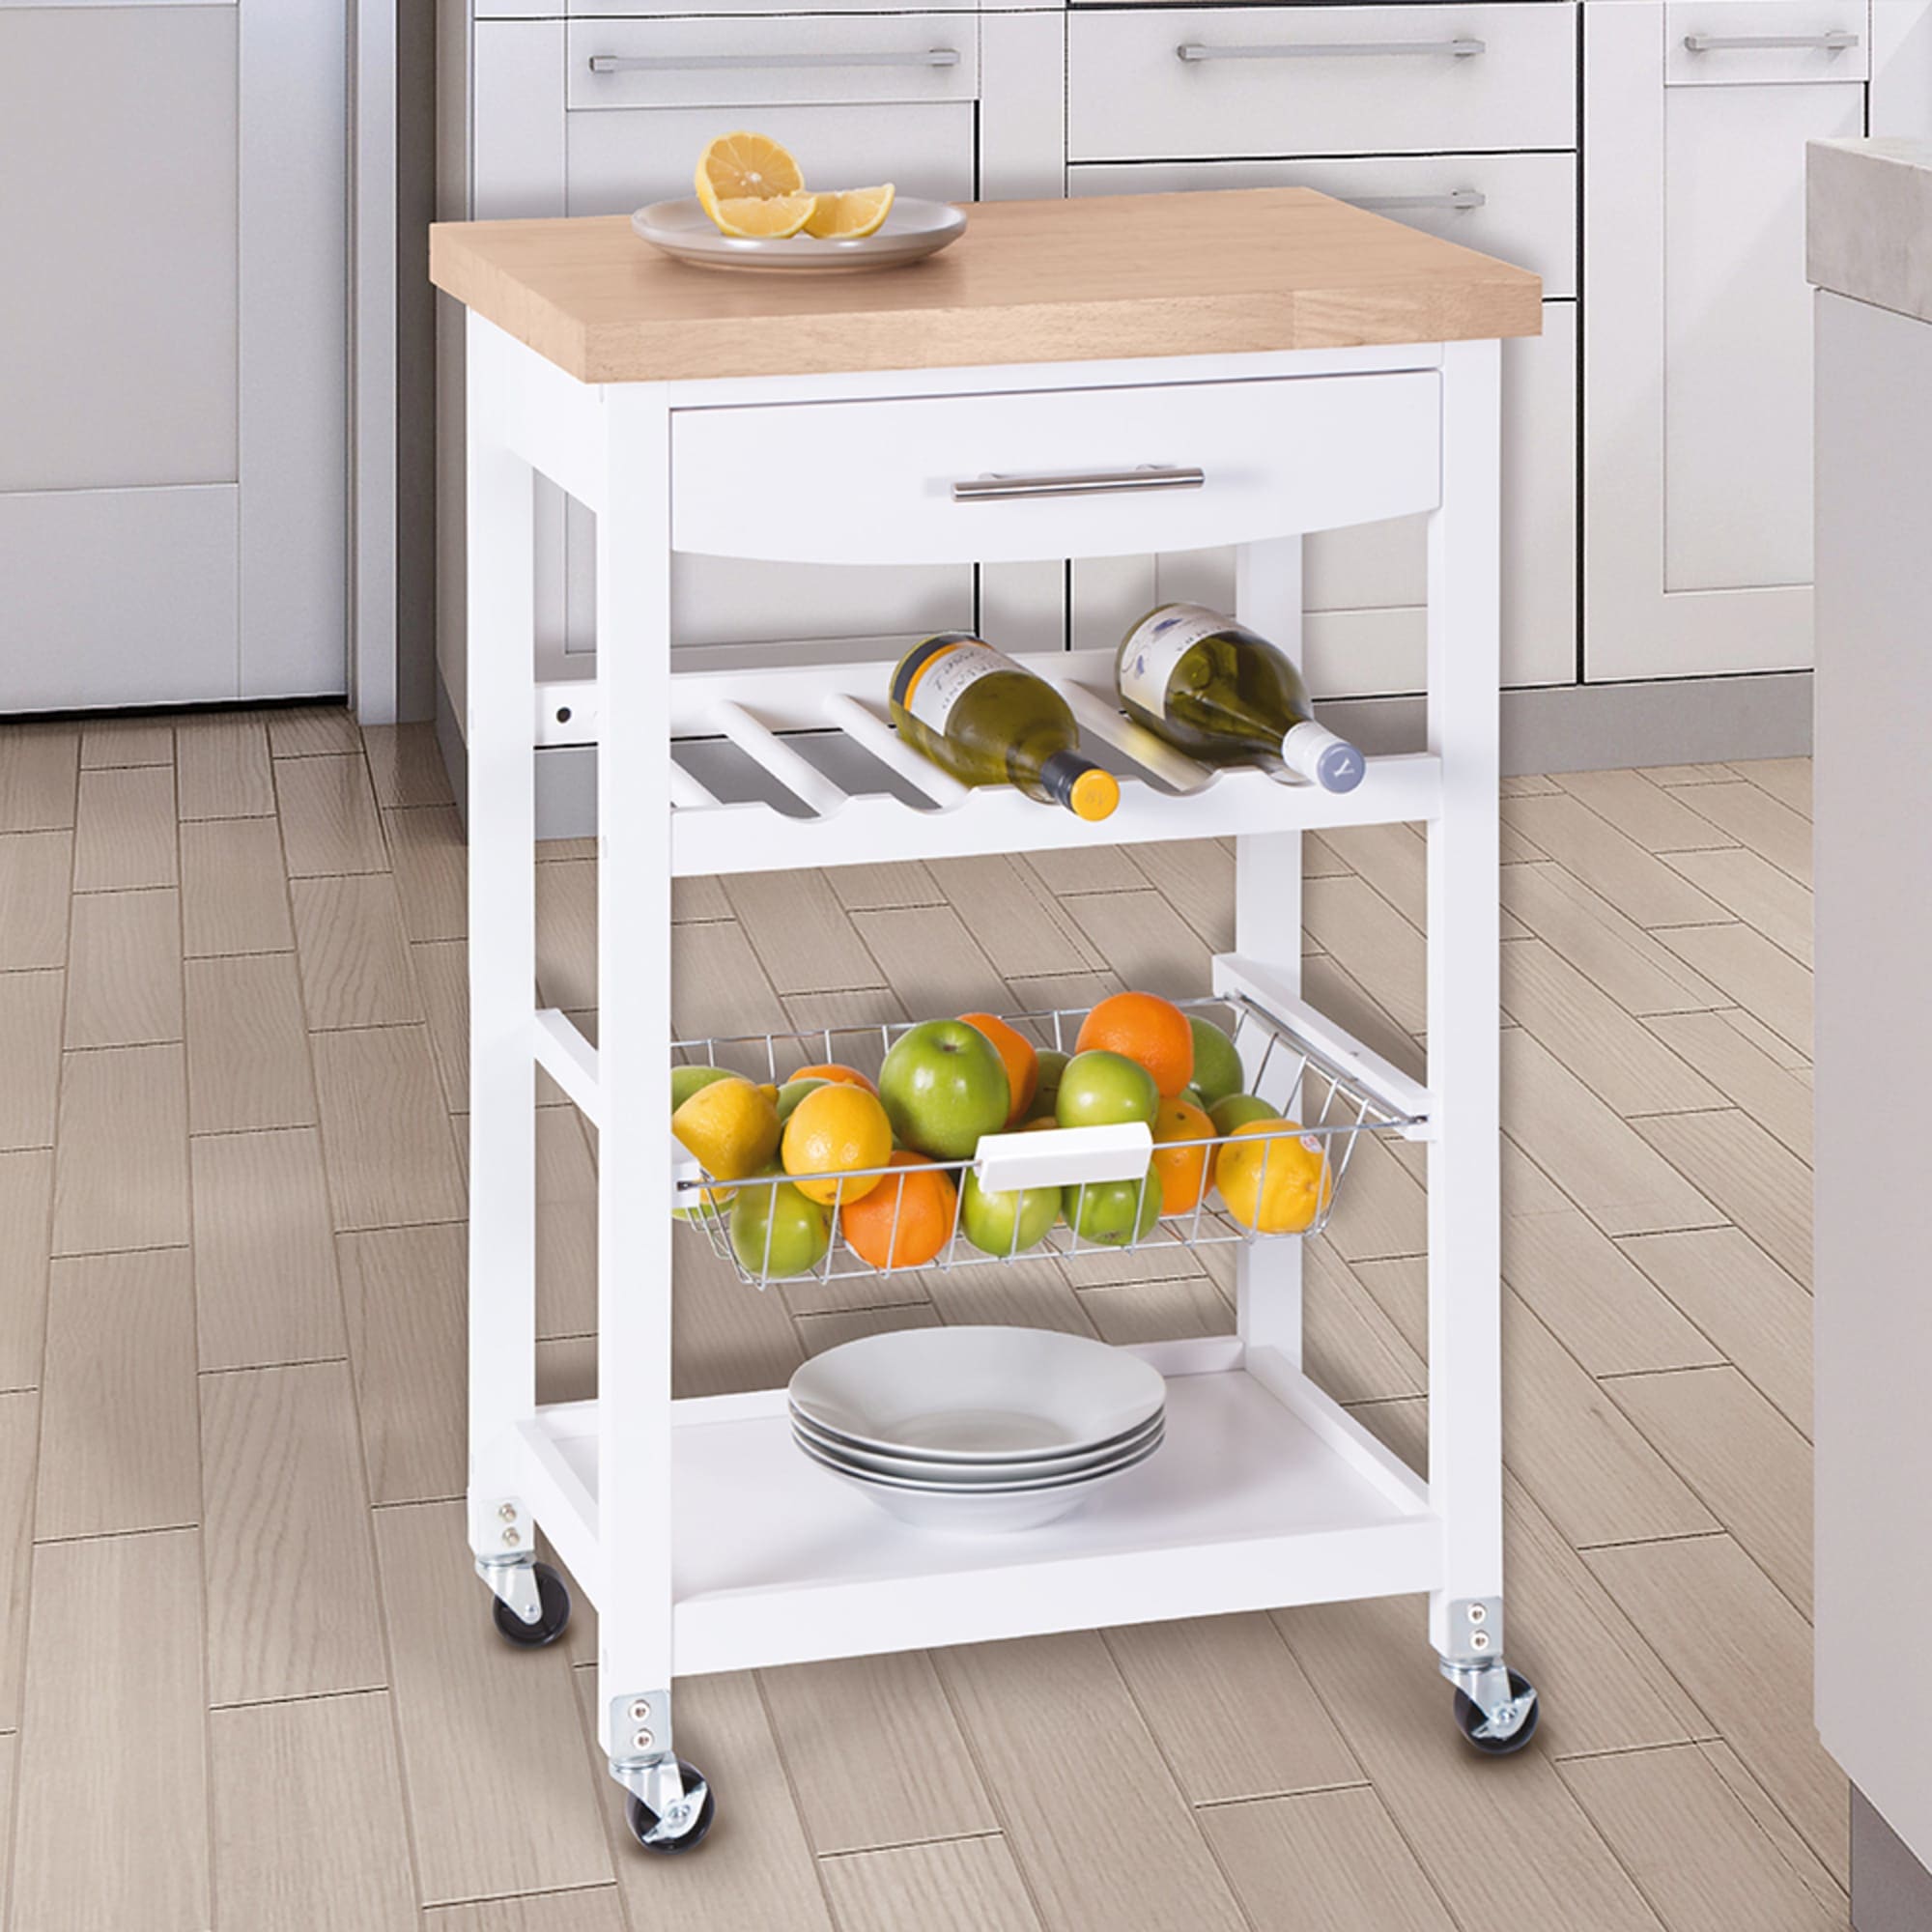 Home Basics 4 Tier Kitchen Trolley with Wood Top, White $100.00 EACH, CASE PACK OF 1